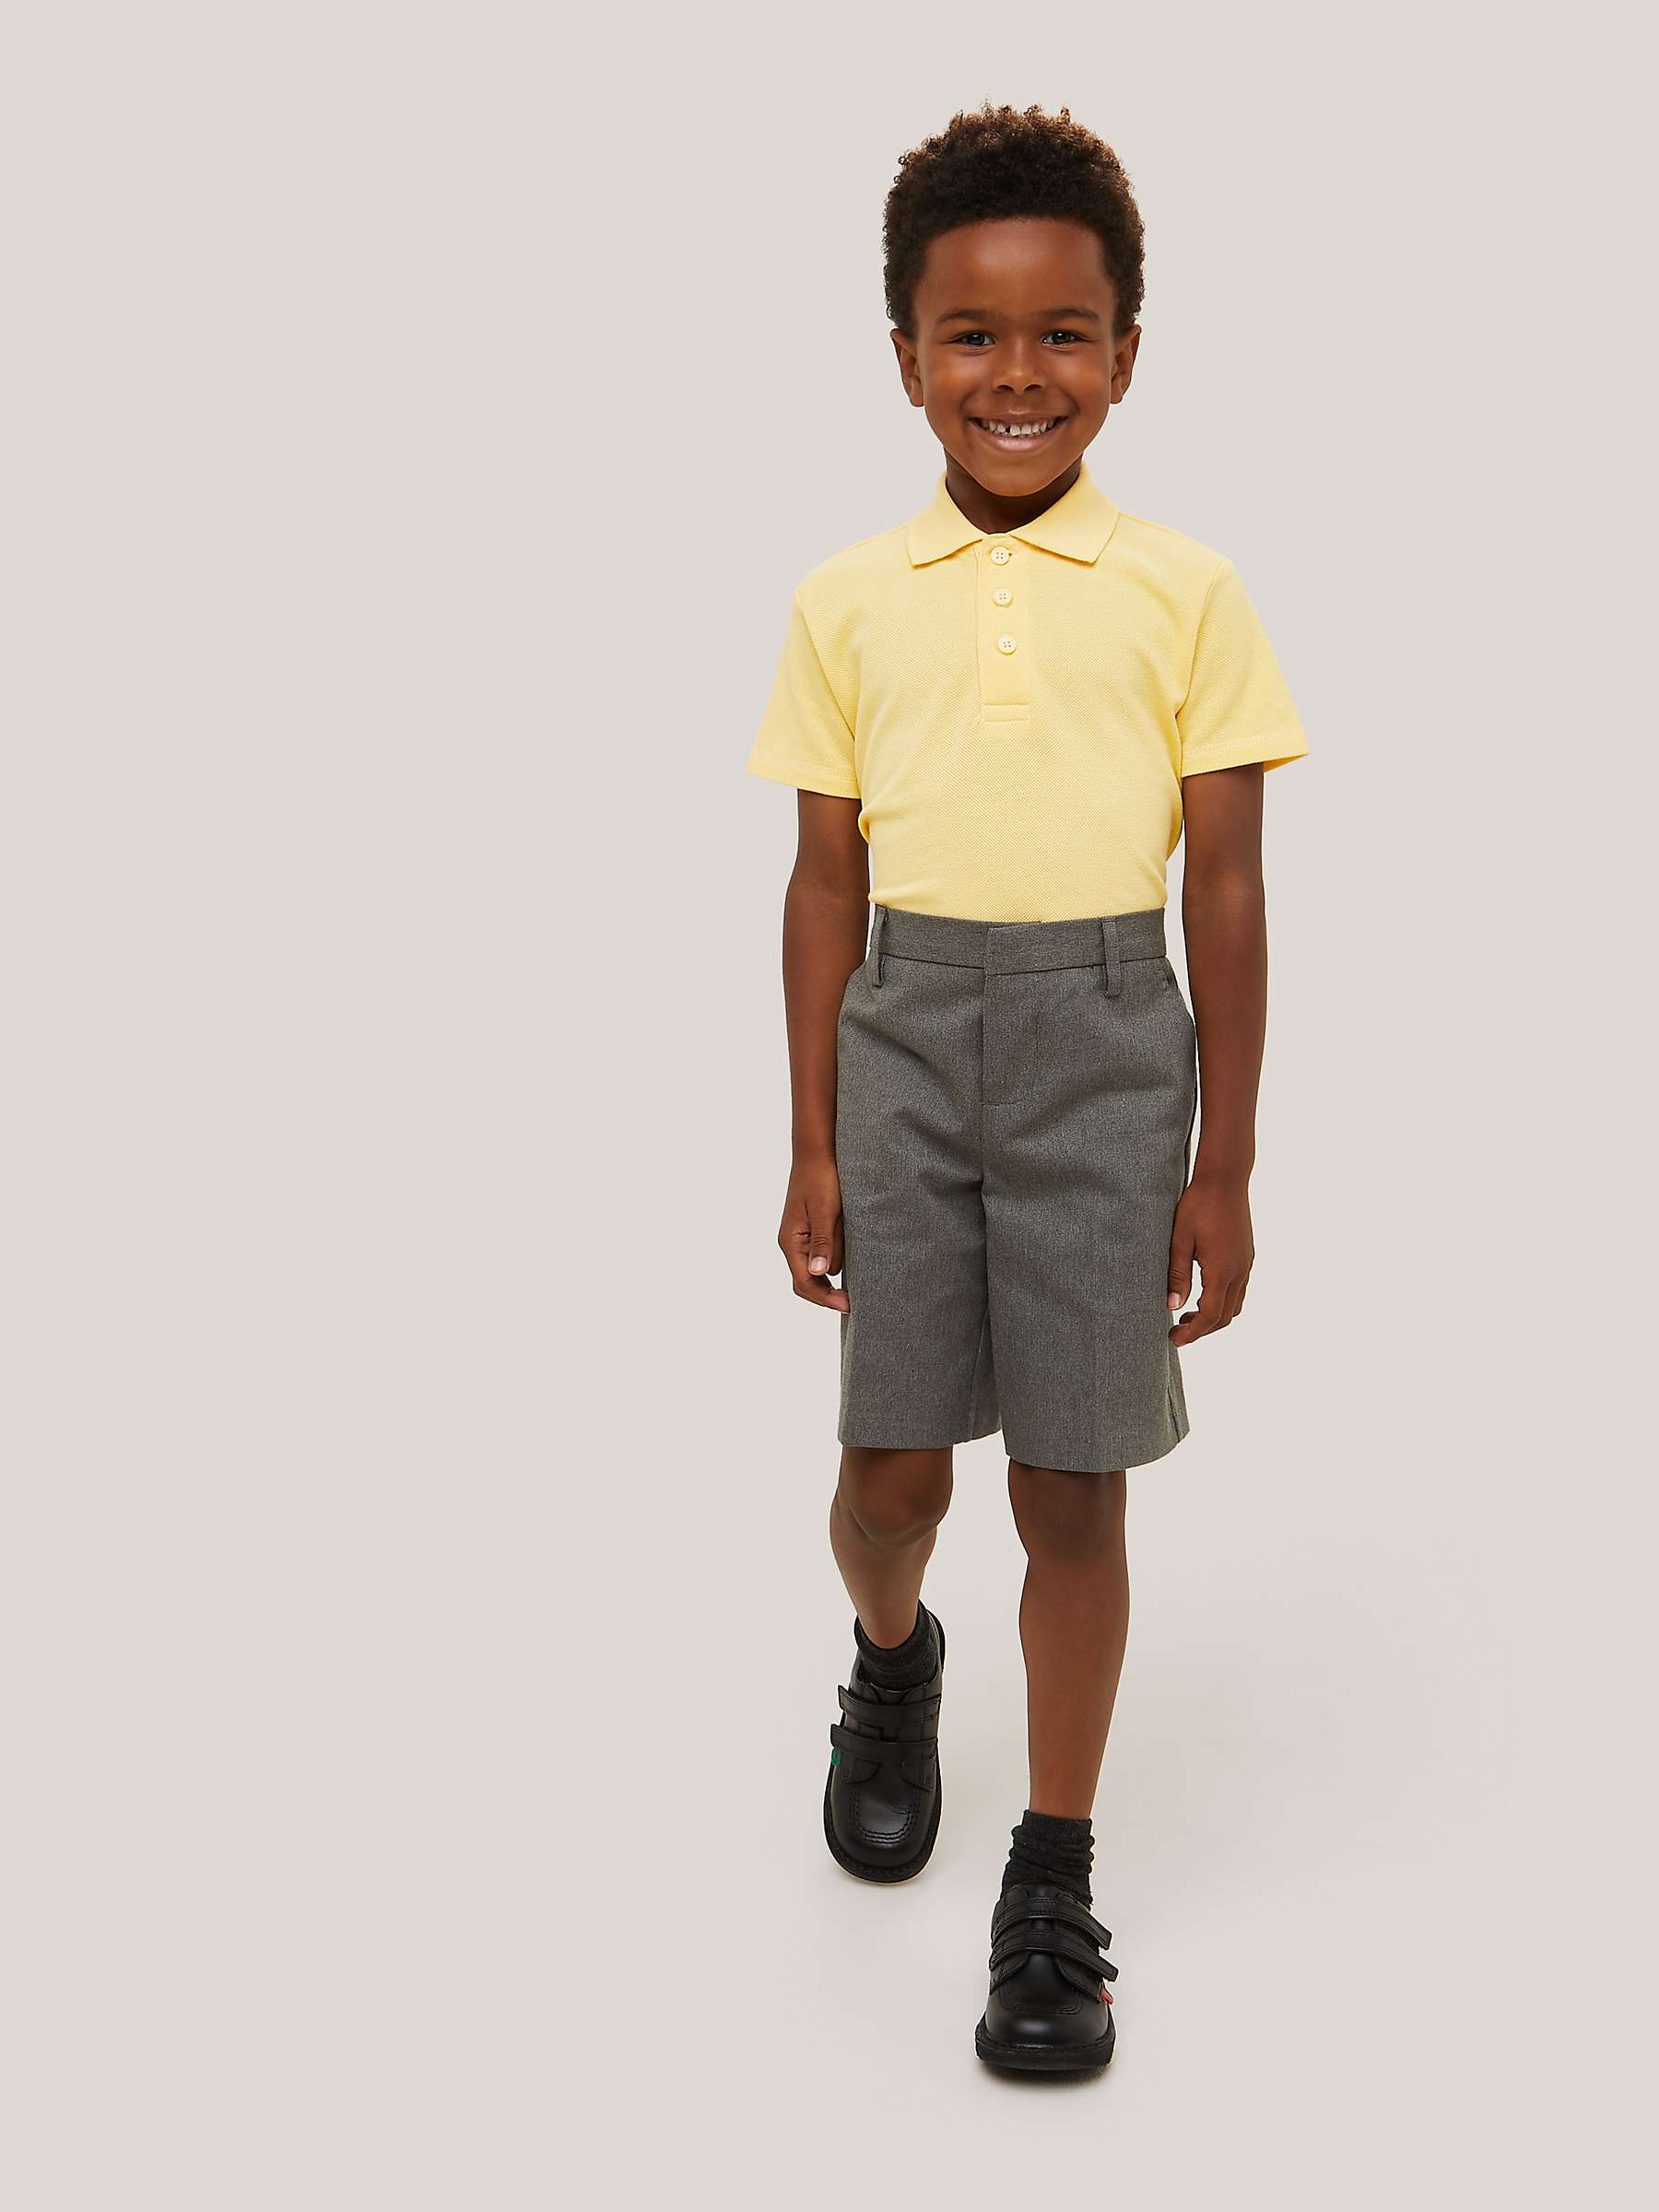 Buy John Lewis Unisex Pure Cotton Easy Care School Polo Shirt, Pack of 2 Online at johnlewis.com